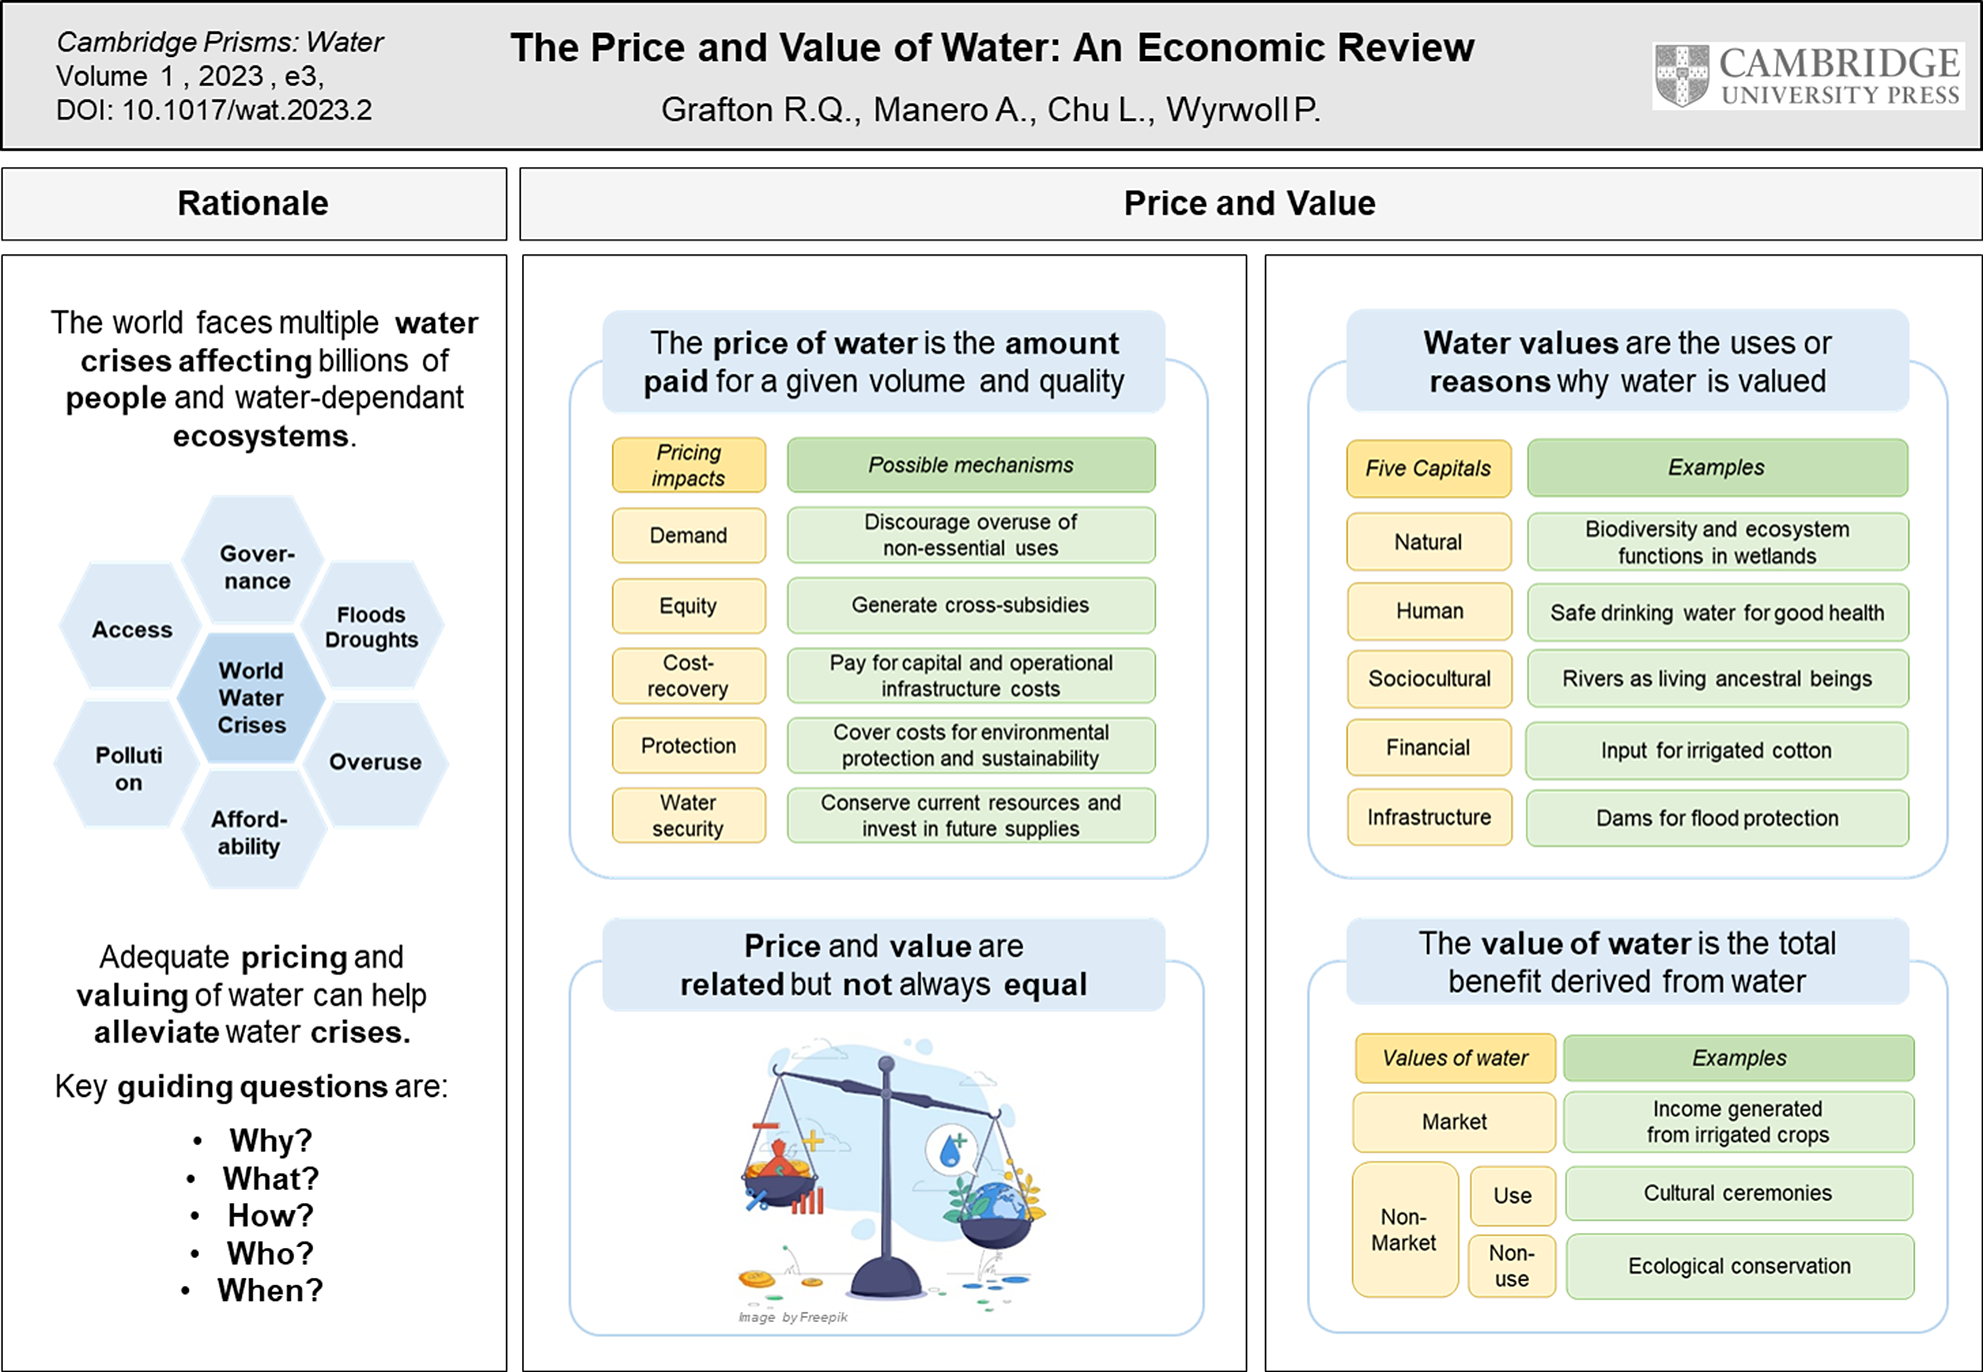 The price and value of water: An economic review